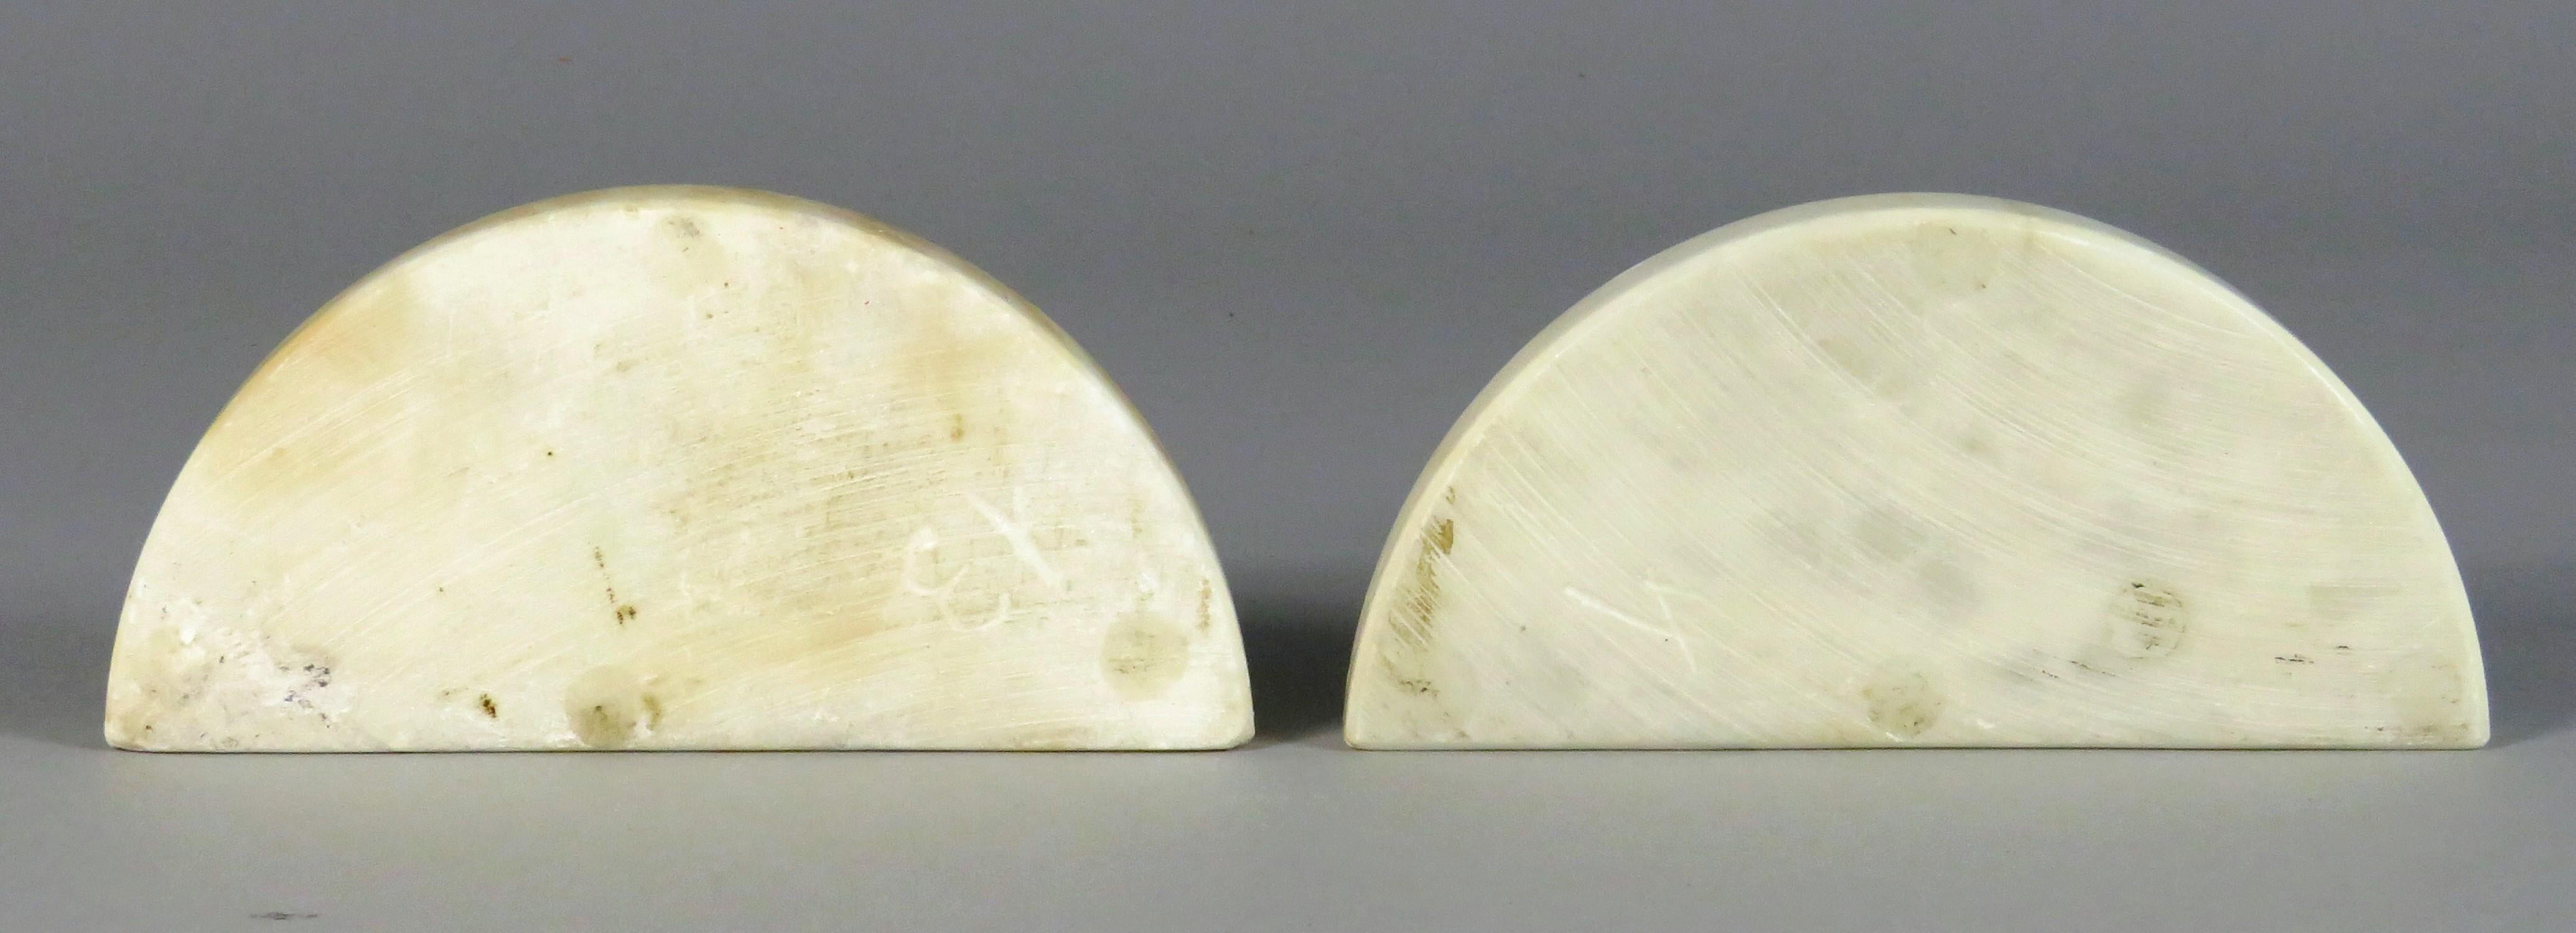 Pair of Grand Tour Style Carved Alabaster Bookends Formed as Classical Ruins In Good Condition For Sale In Ottawa, Ontario